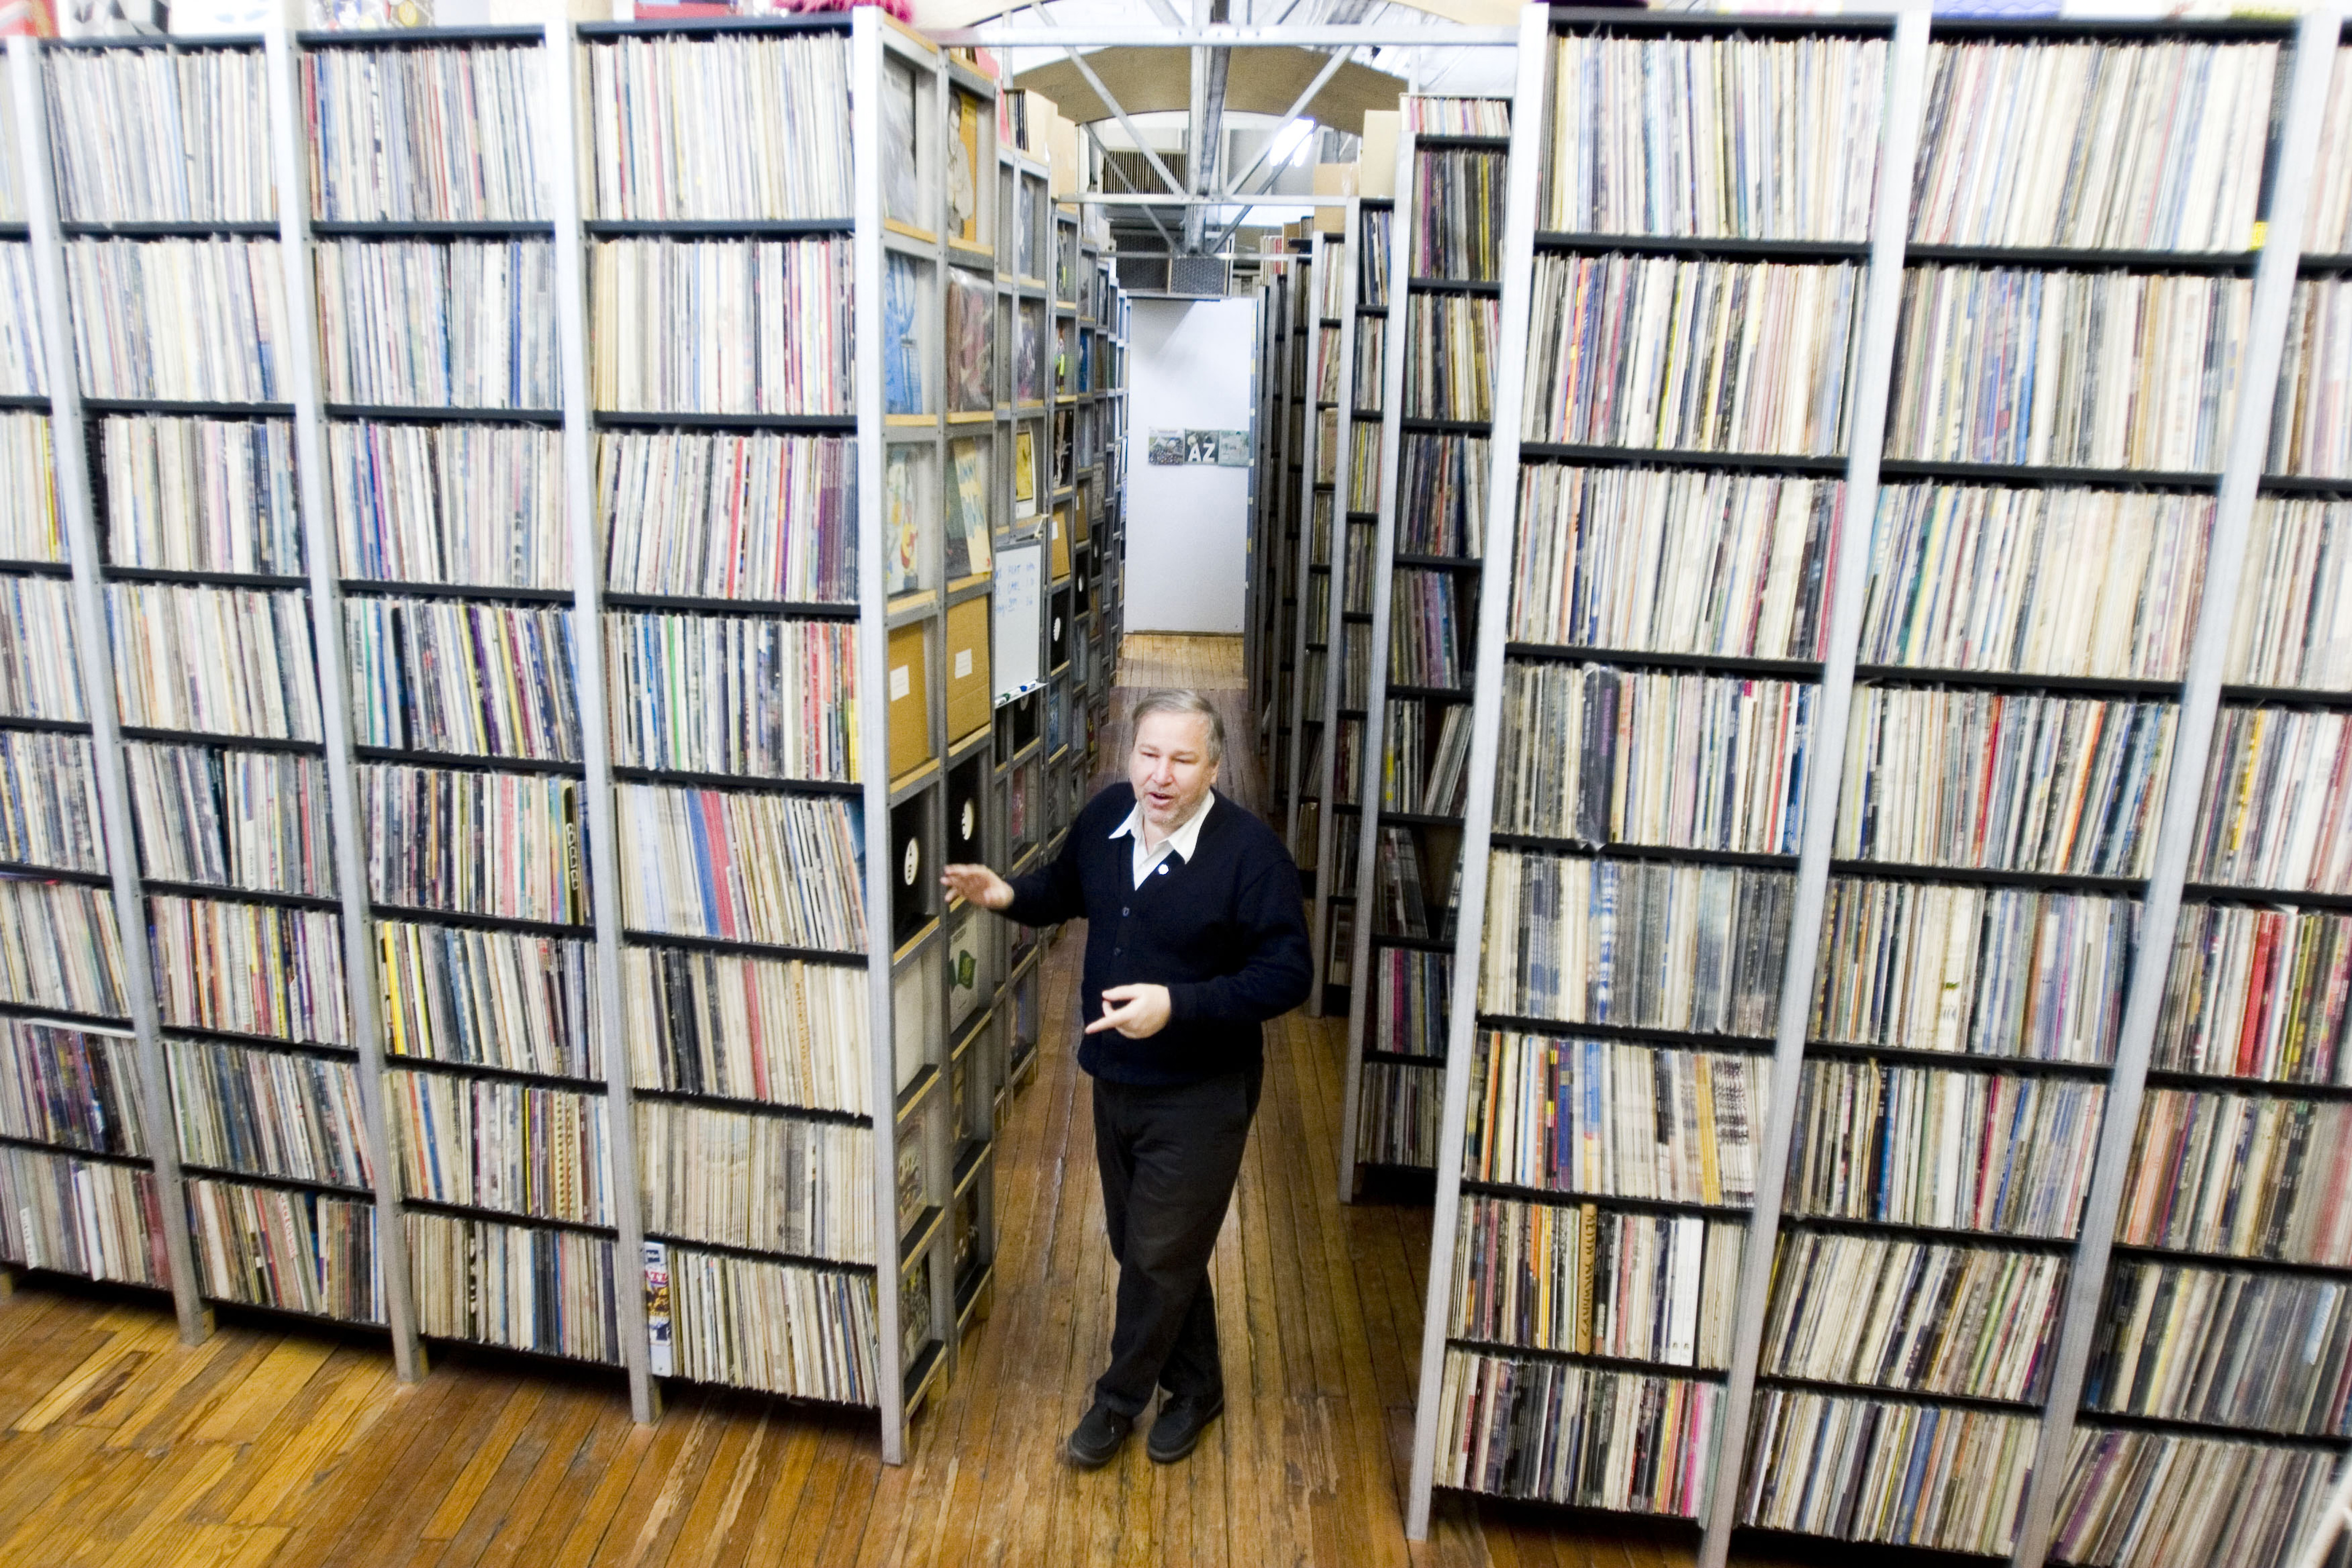 The Archive of Contemporary Music